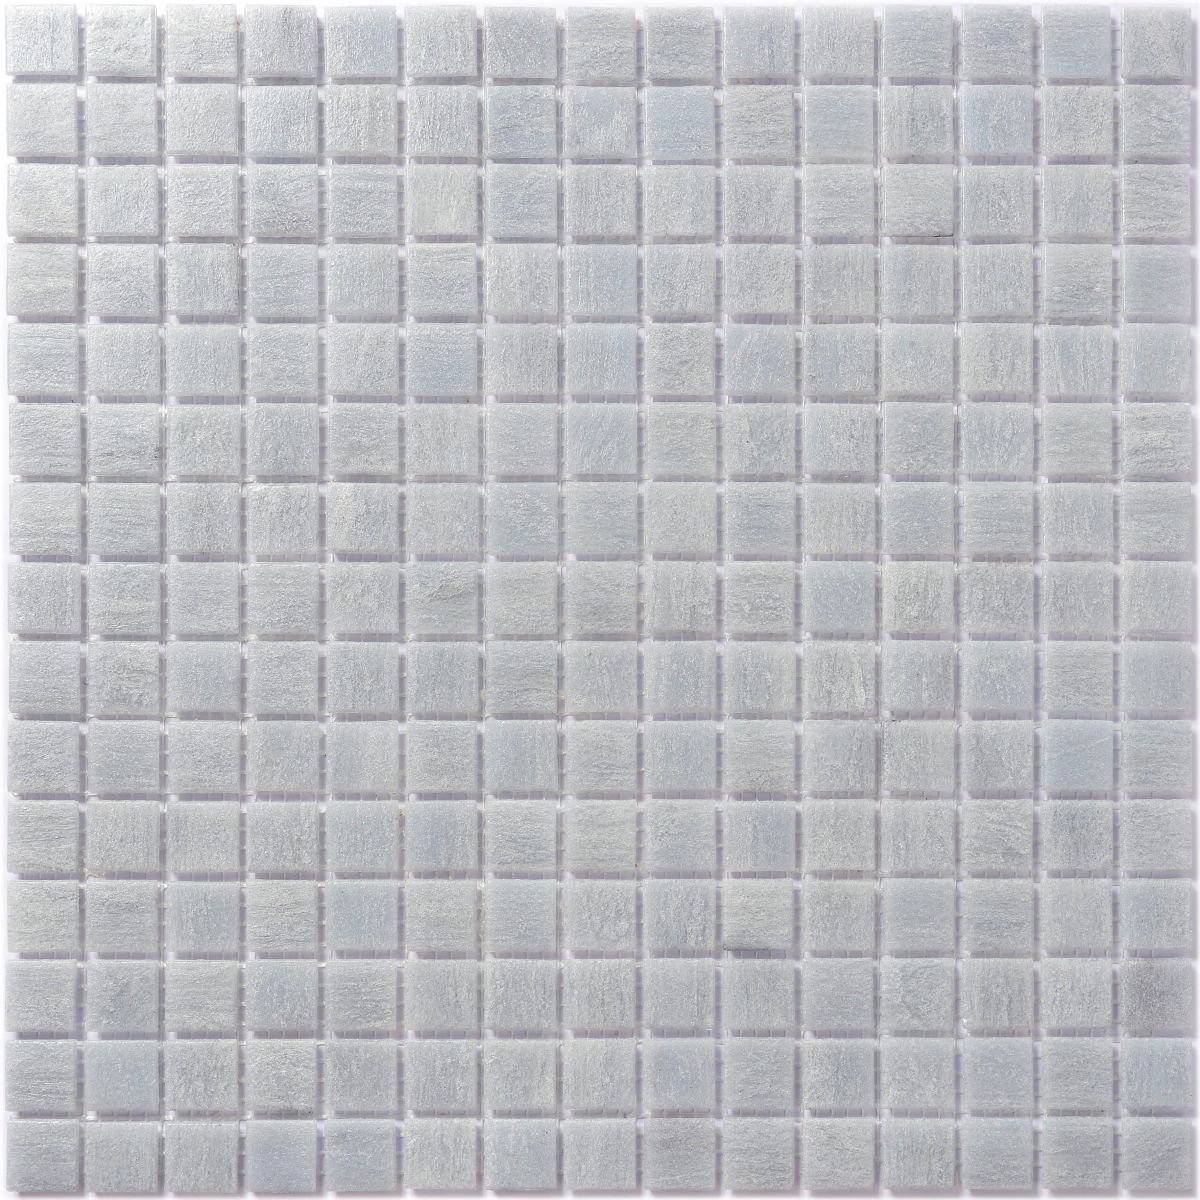 Hot-Melted Texture Fine Moss Glass Square Wrinkle Grey Mosaic Tile 